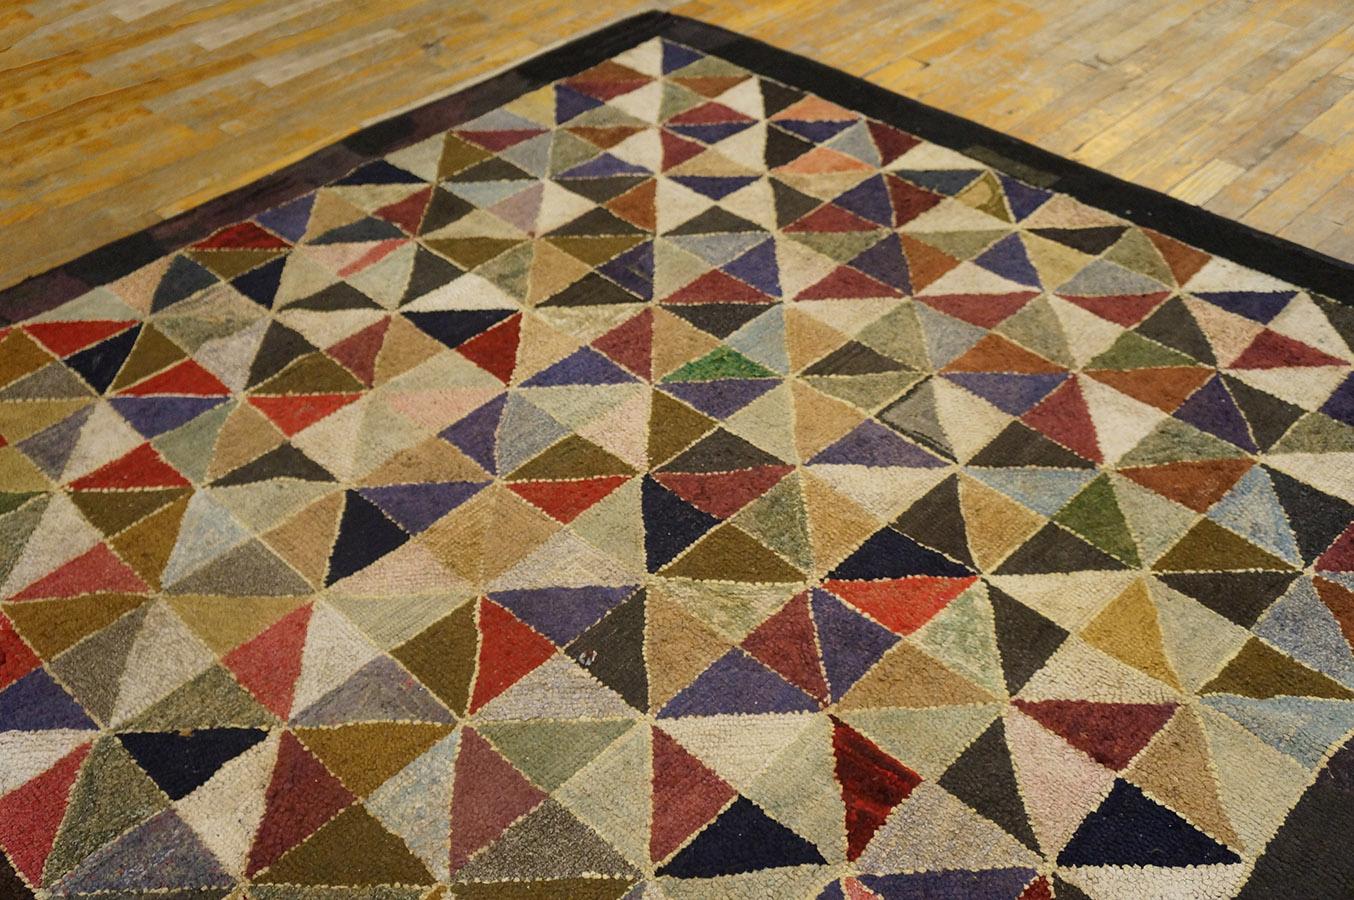 Early 20th Century American Hooked Rug ( 6' x 6' - 183 x 183 cm ) For Sale 8